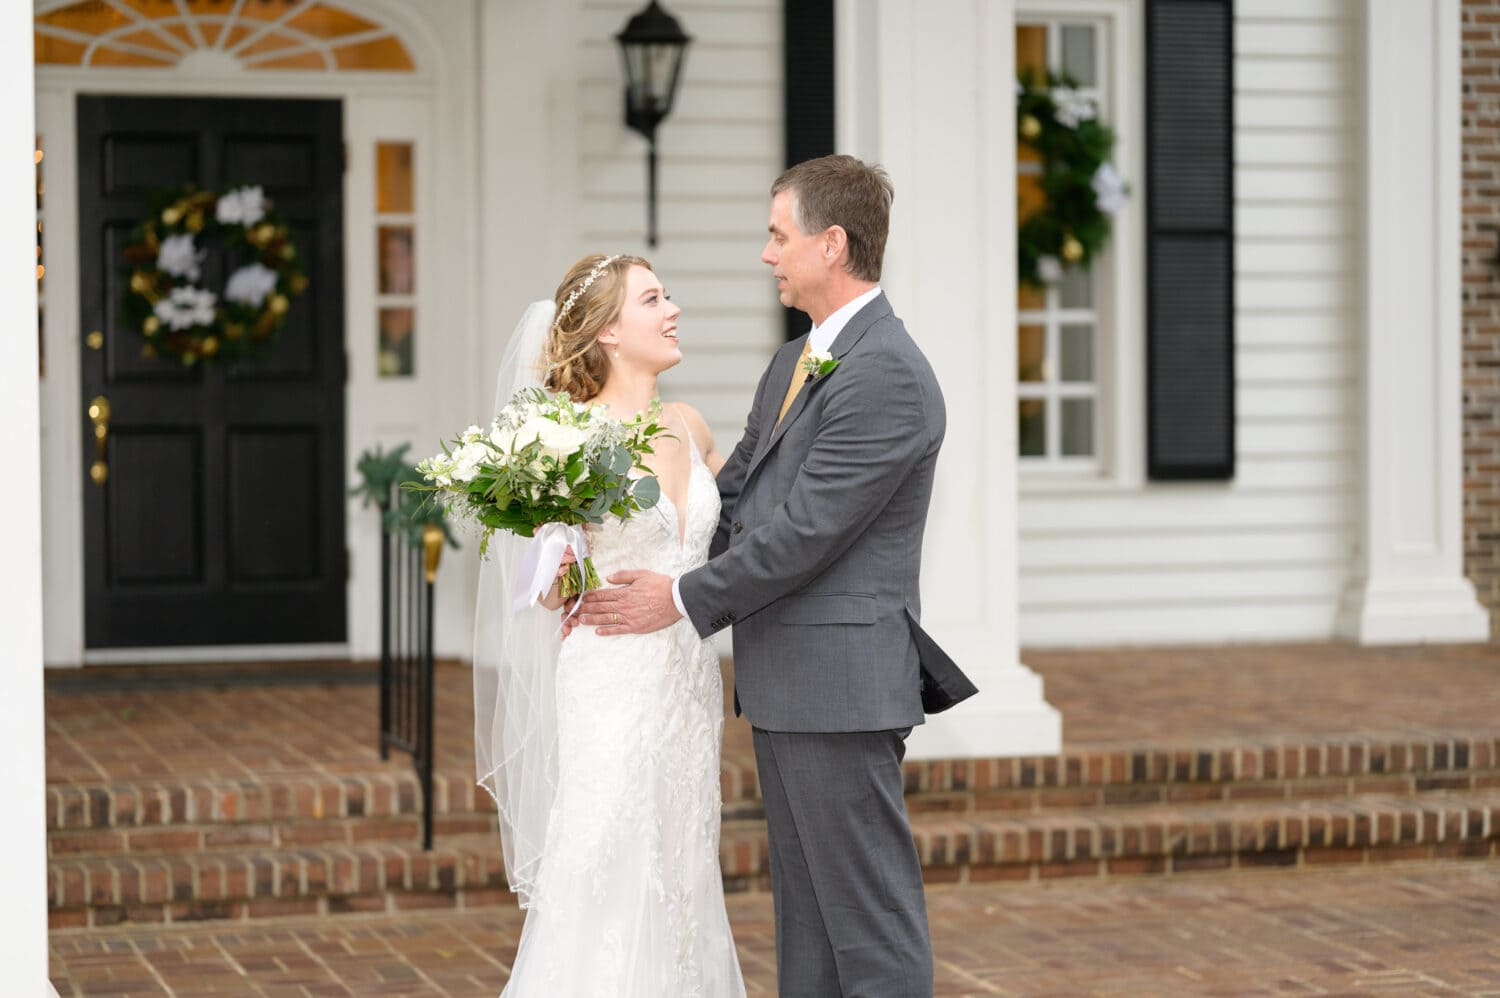 First look with brides father - Pawleys Plantation Golf & Country Club